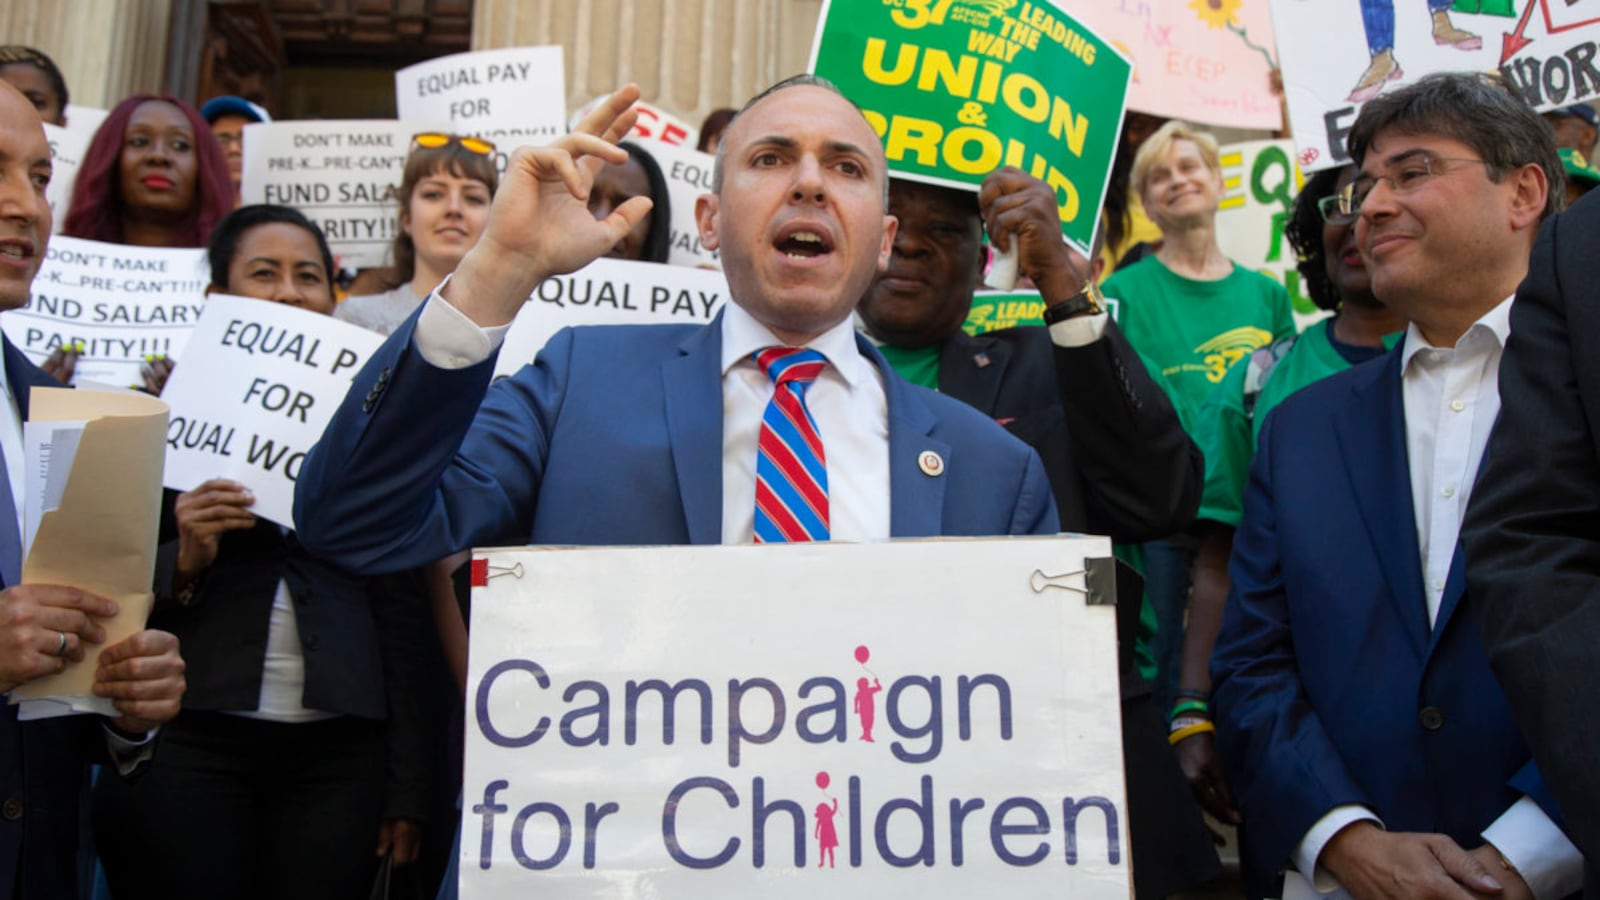 City Councilman Mark Treyger speaks at a rally for pay parity among early child education providers.